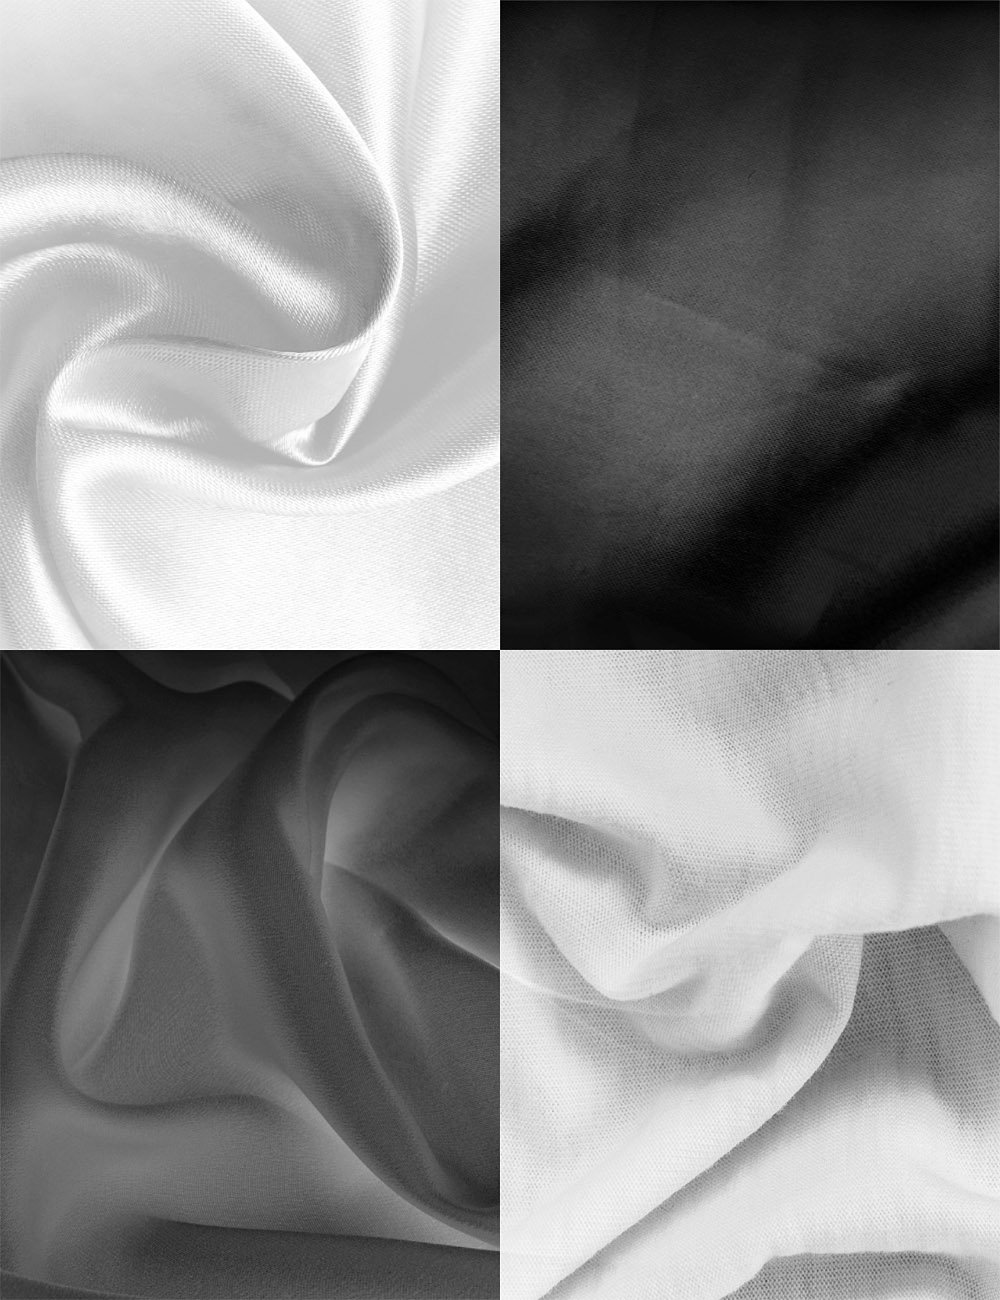 Fabric Folds PS Brushes by: RajRaja, 3D Models by Daz 3D